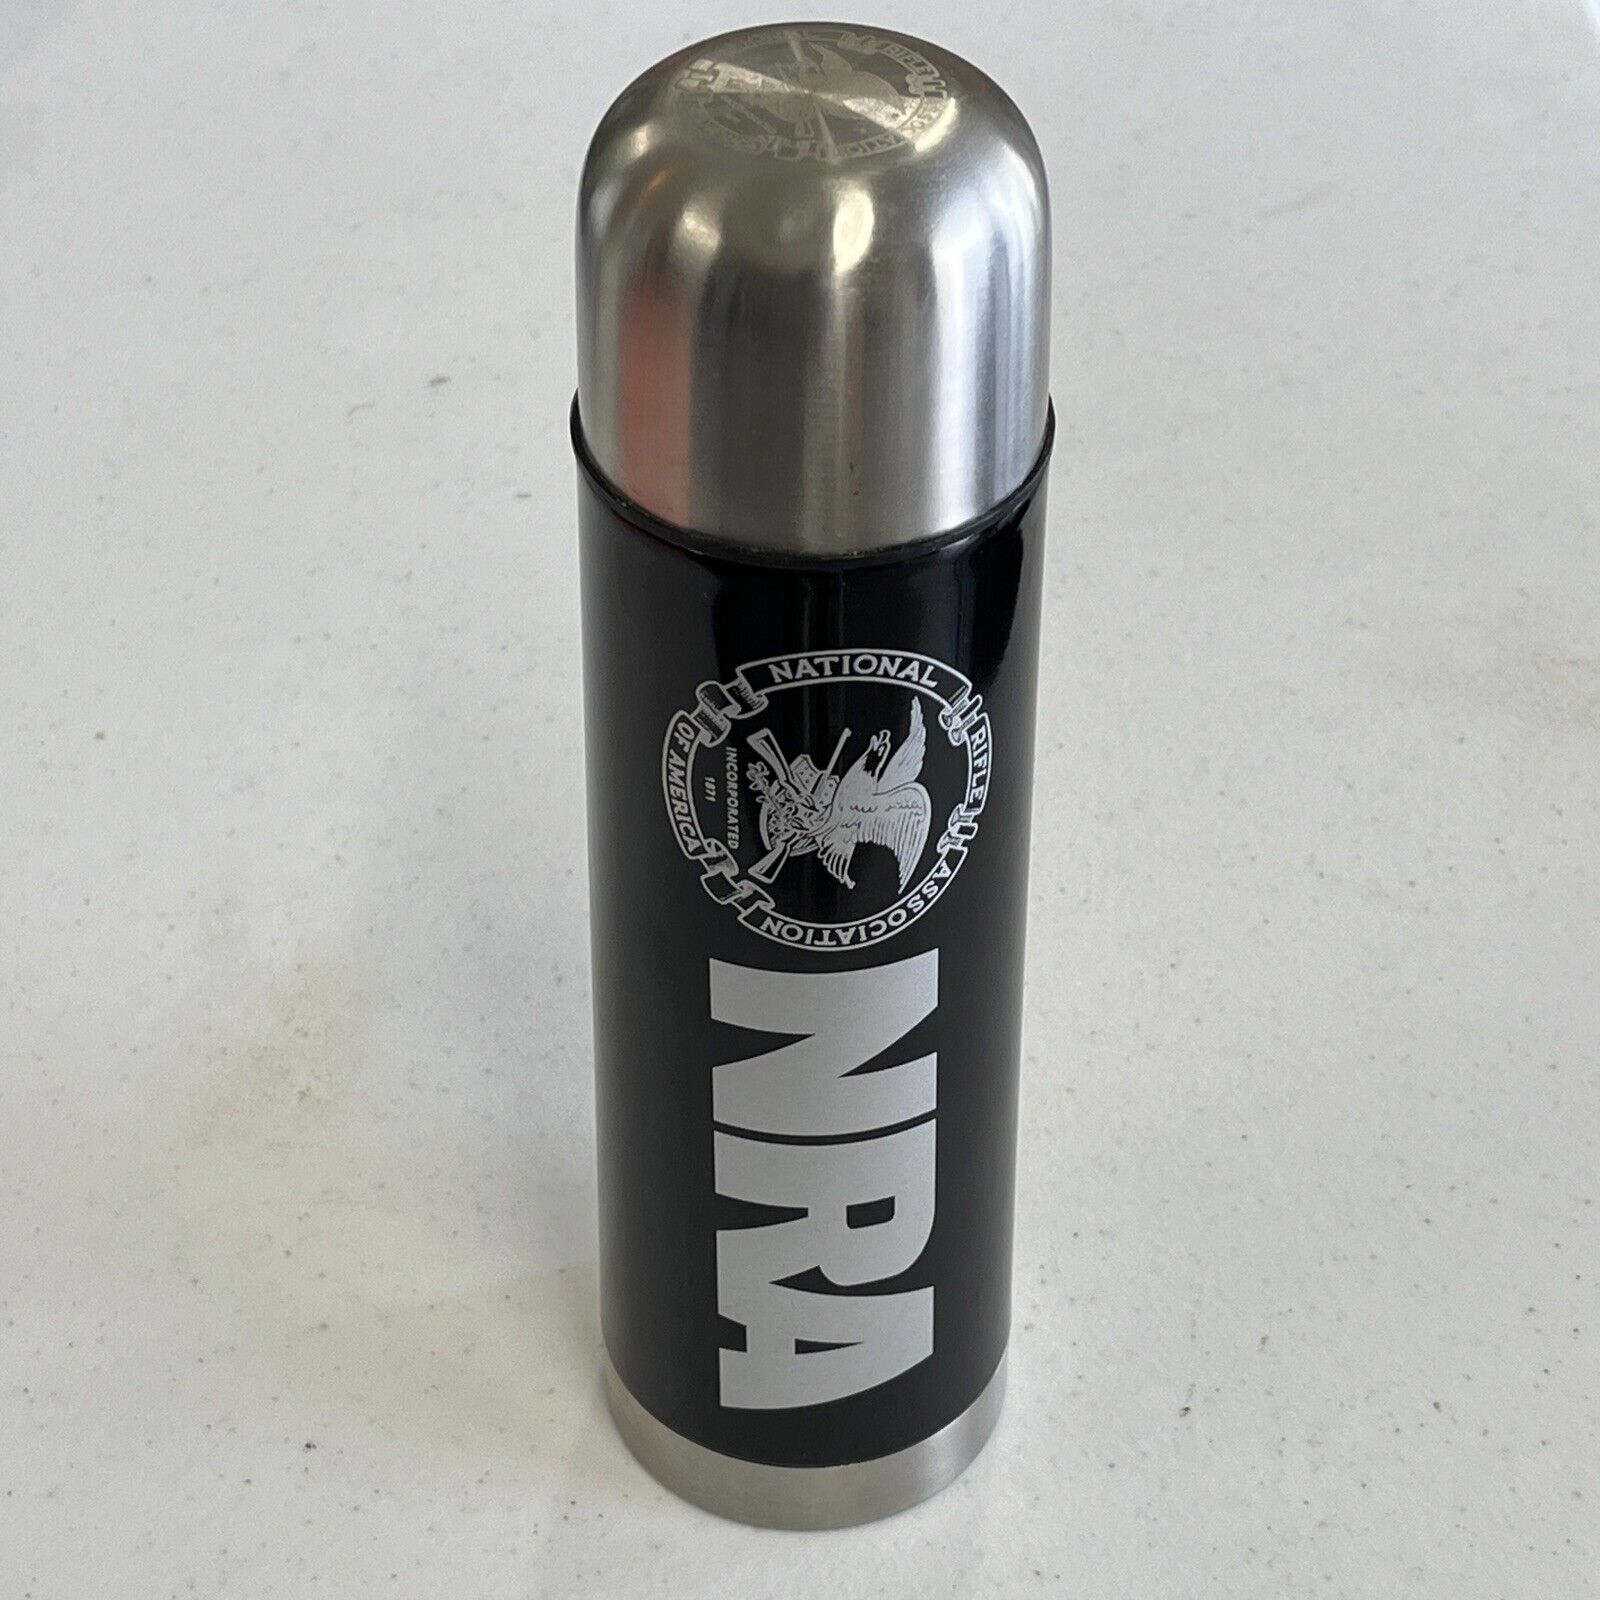 NRA National Rifle Association Stainless Steel Bullet Shape Coffee Mug Thermos